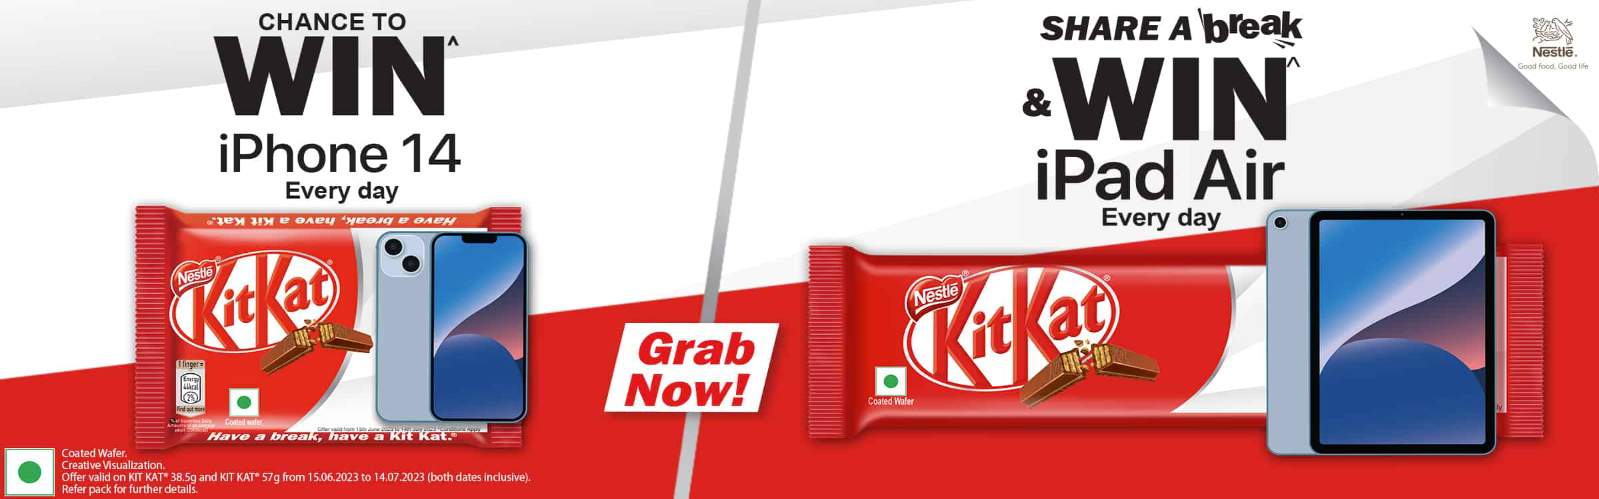 Kitkat Share a Break Contest - Get Free Win iPhone 14, iPad